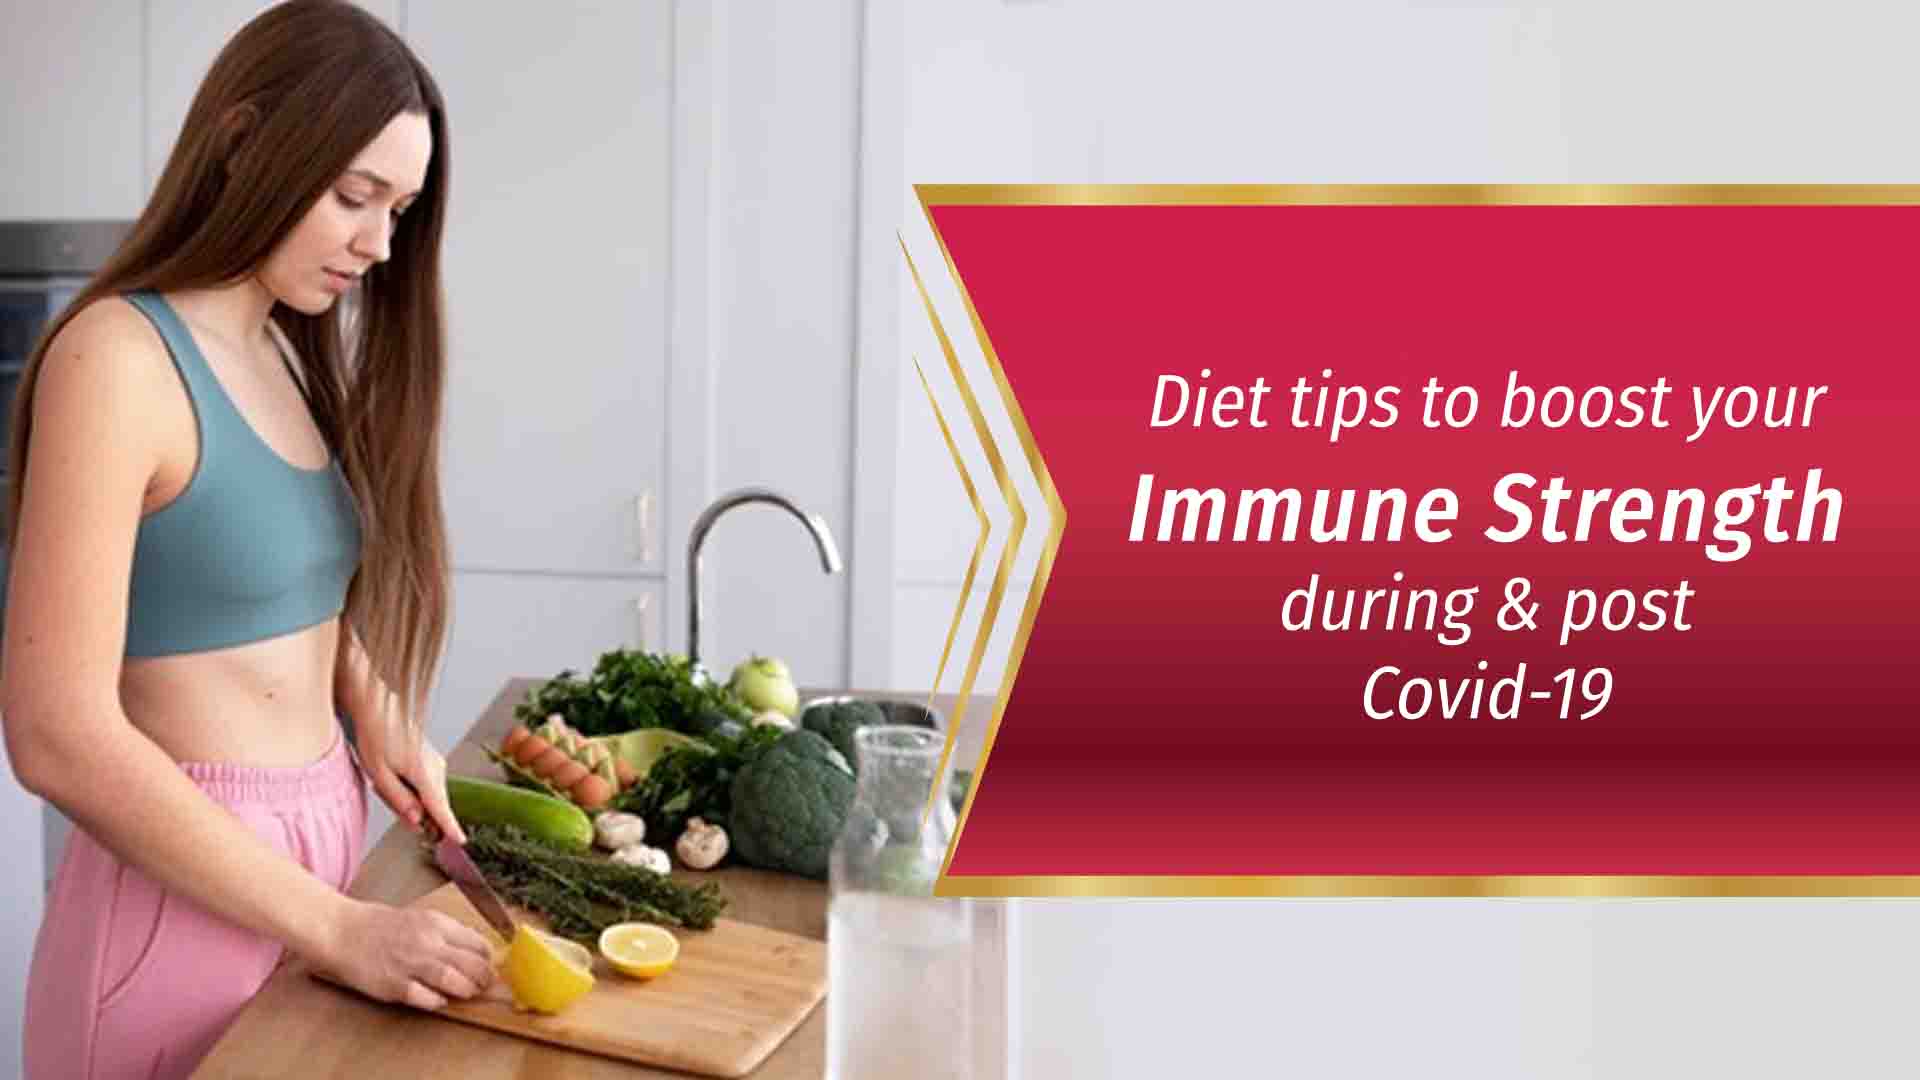 Diet Tips To Boost Your Immune Strength During And Post Covid-19